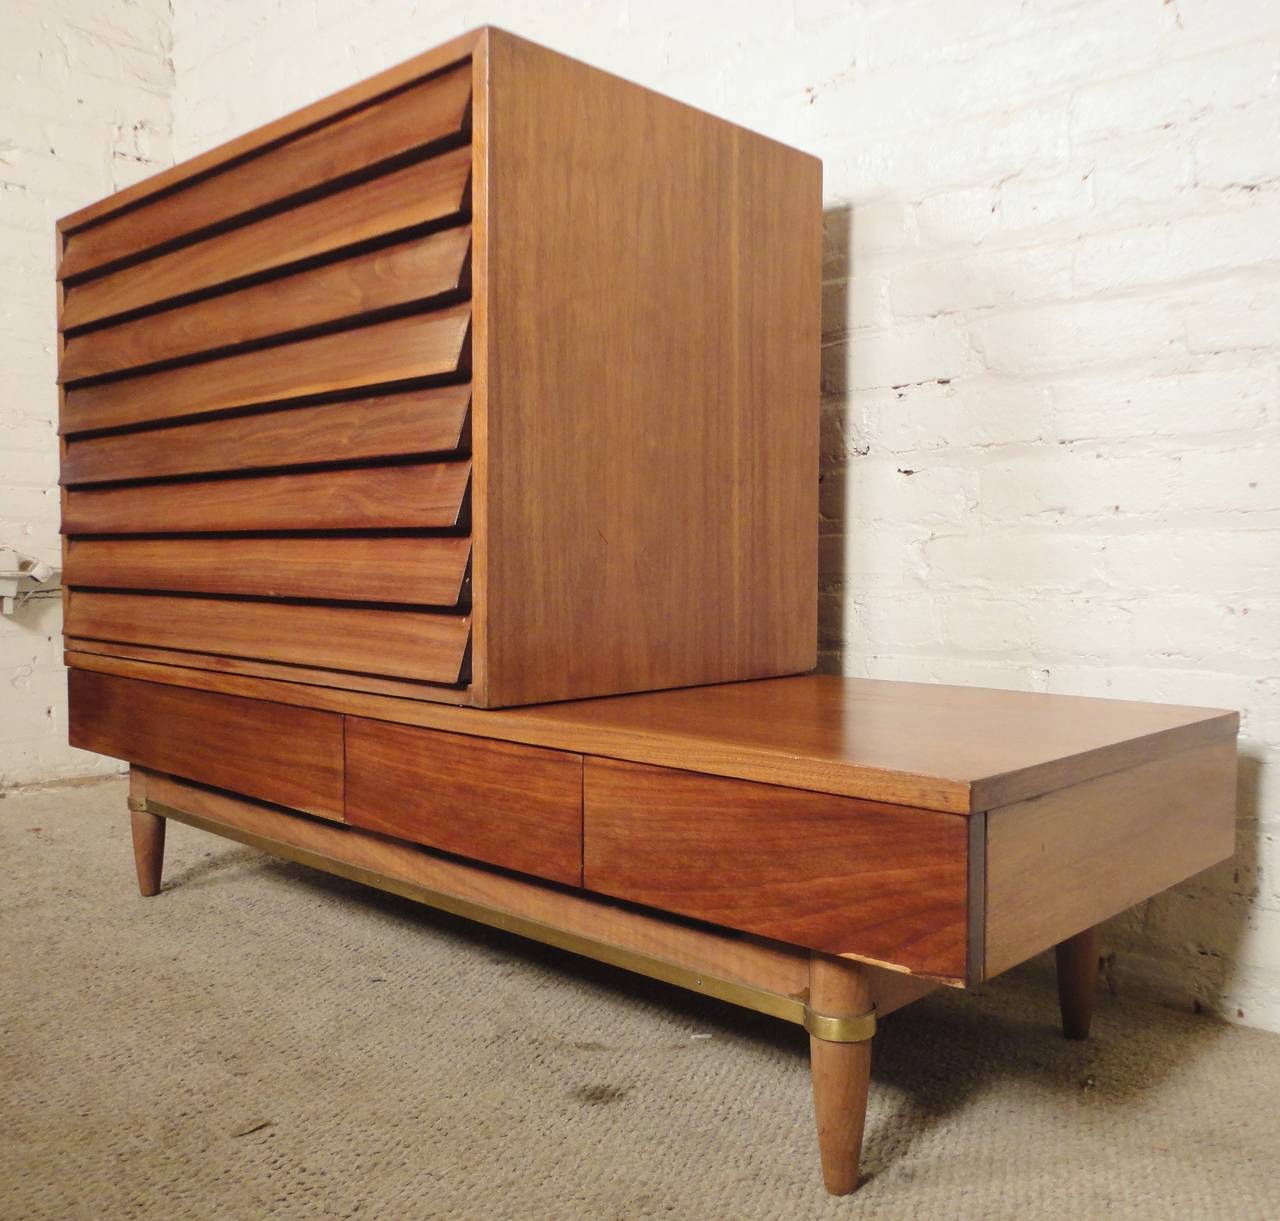 Mid-Century Modern unit by Merton Gershun for American of Martinsville's Dania Series. Features a three-drawer coffee table base with tapered legs and brass runner, three-drawer dresser with unusual louvered front and warm walnut grain throughout.